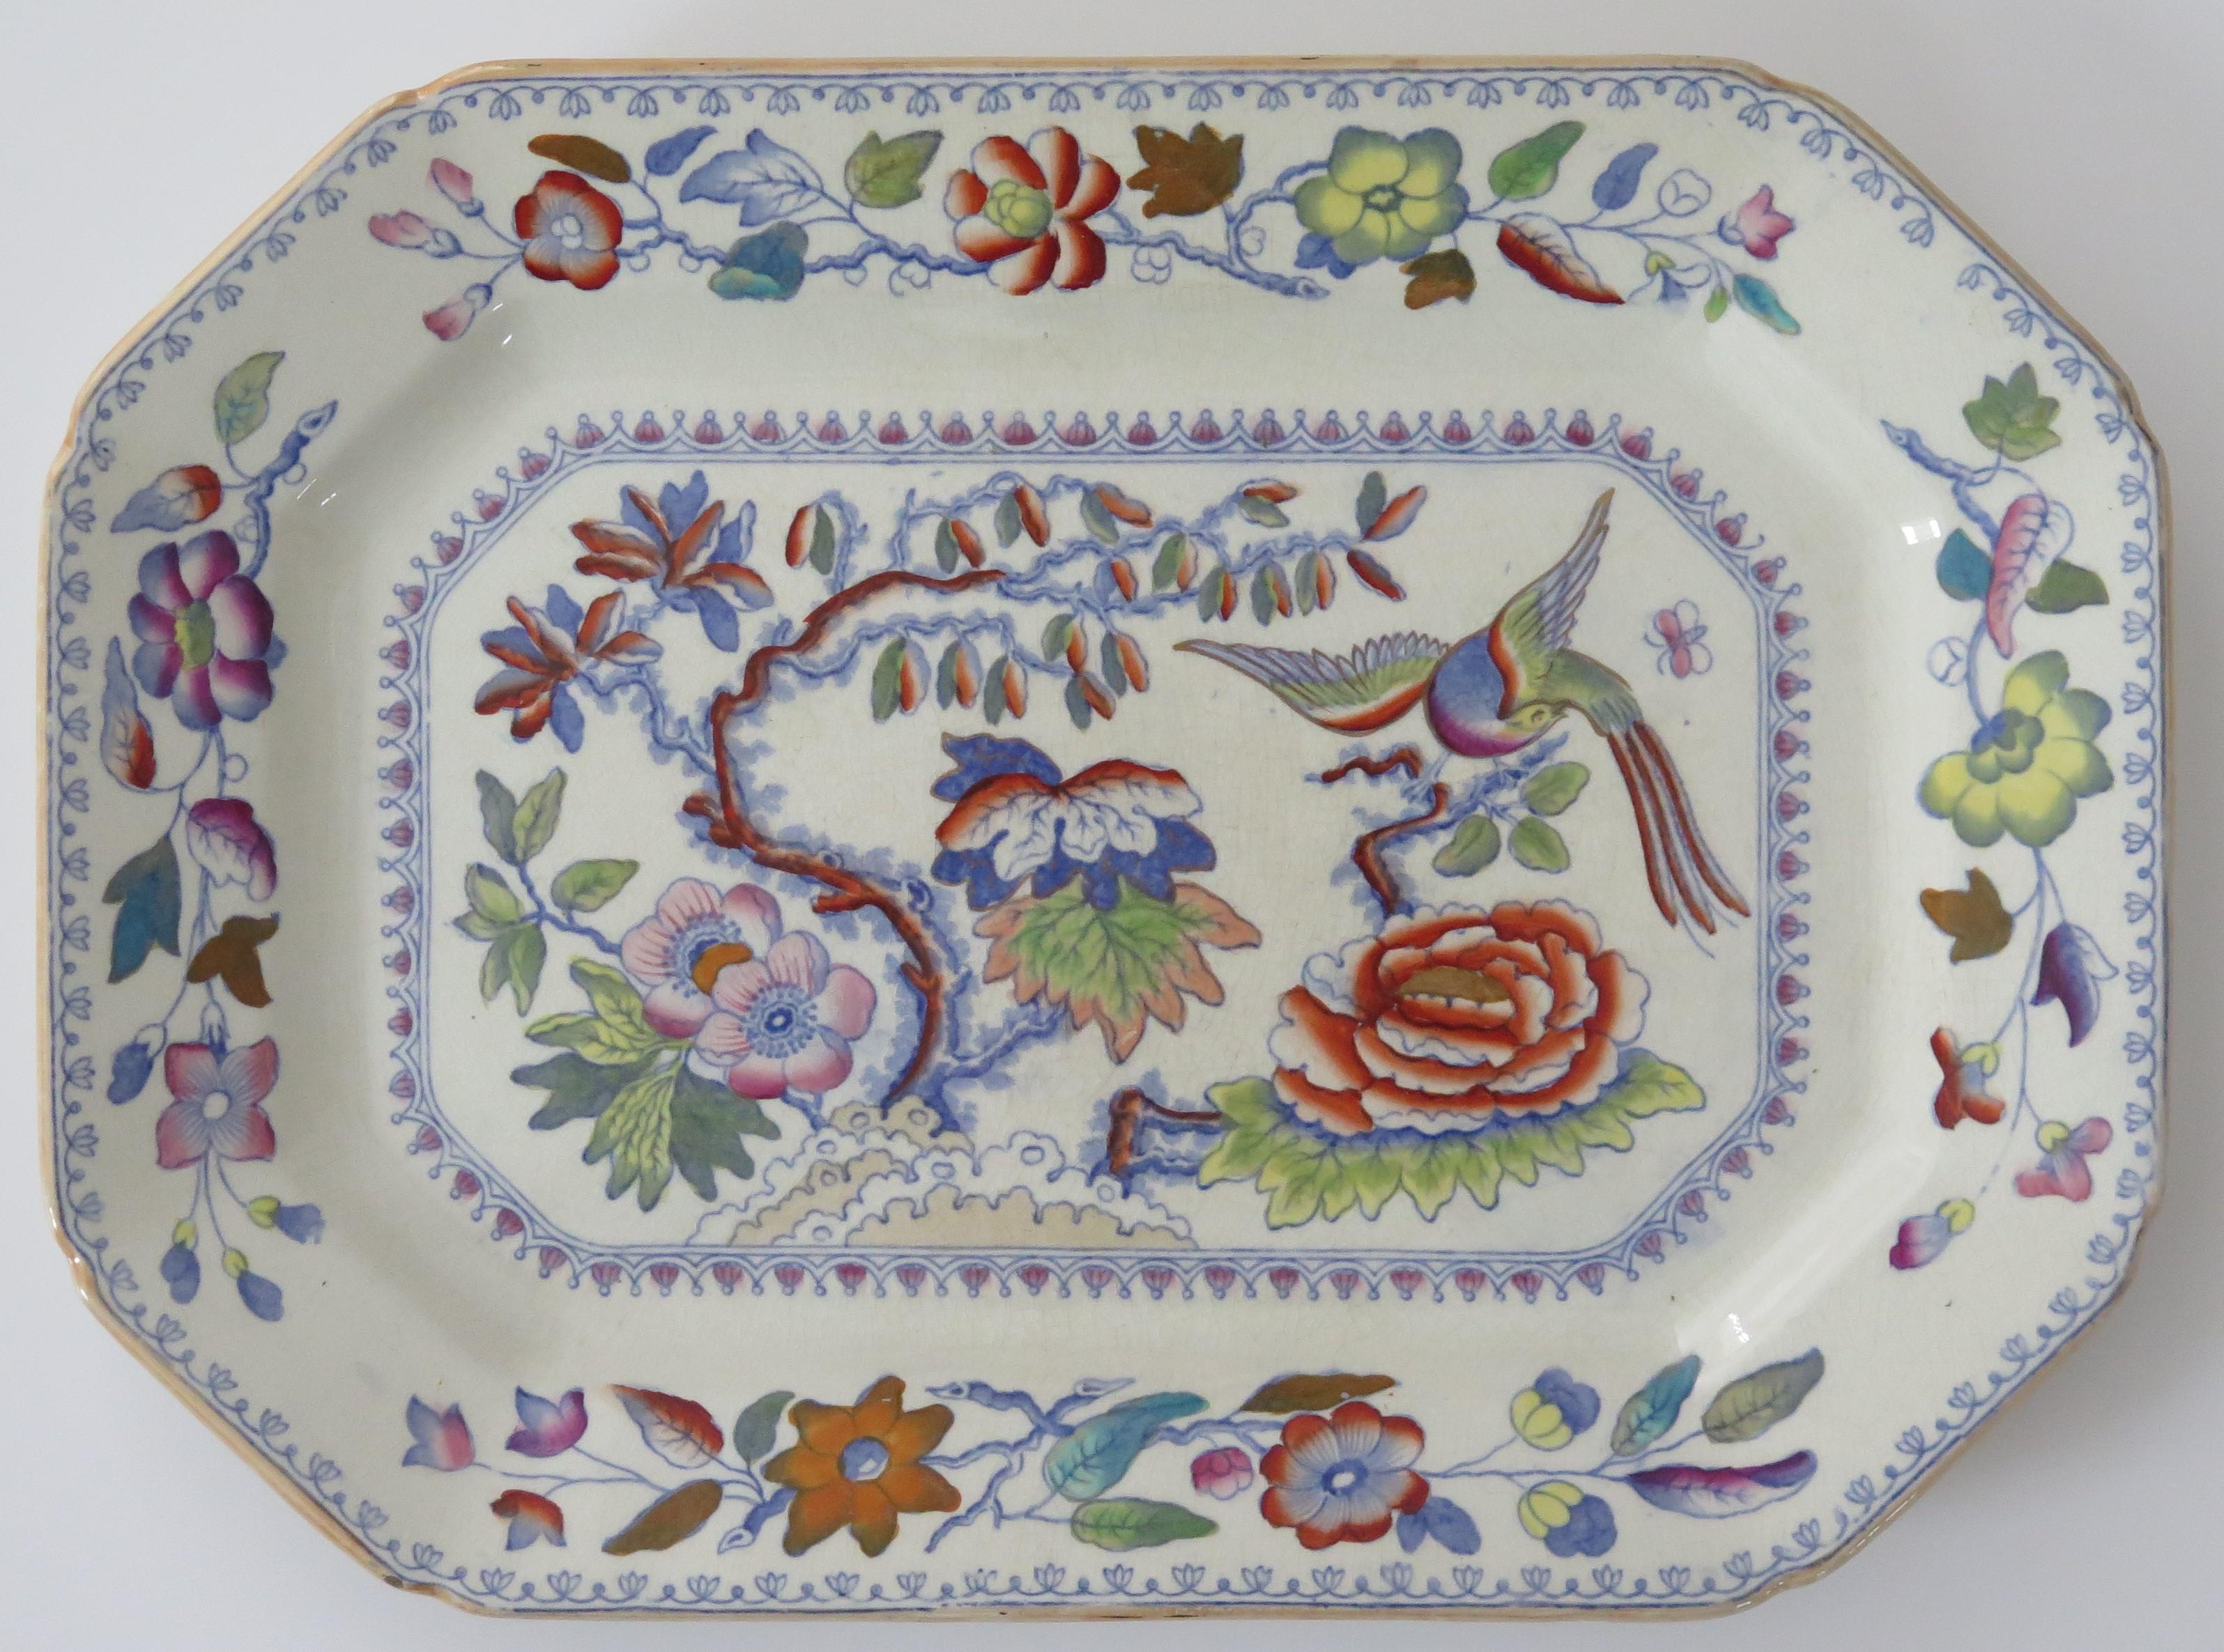 This is an ironstone large platter or meat plate in the flying bird pattern, made by Mason's Ironstone of Lane Delph, Staffordshire, England, during the 19th century, circa 1880.

The plate is rectangular in shape with canted corners, making an